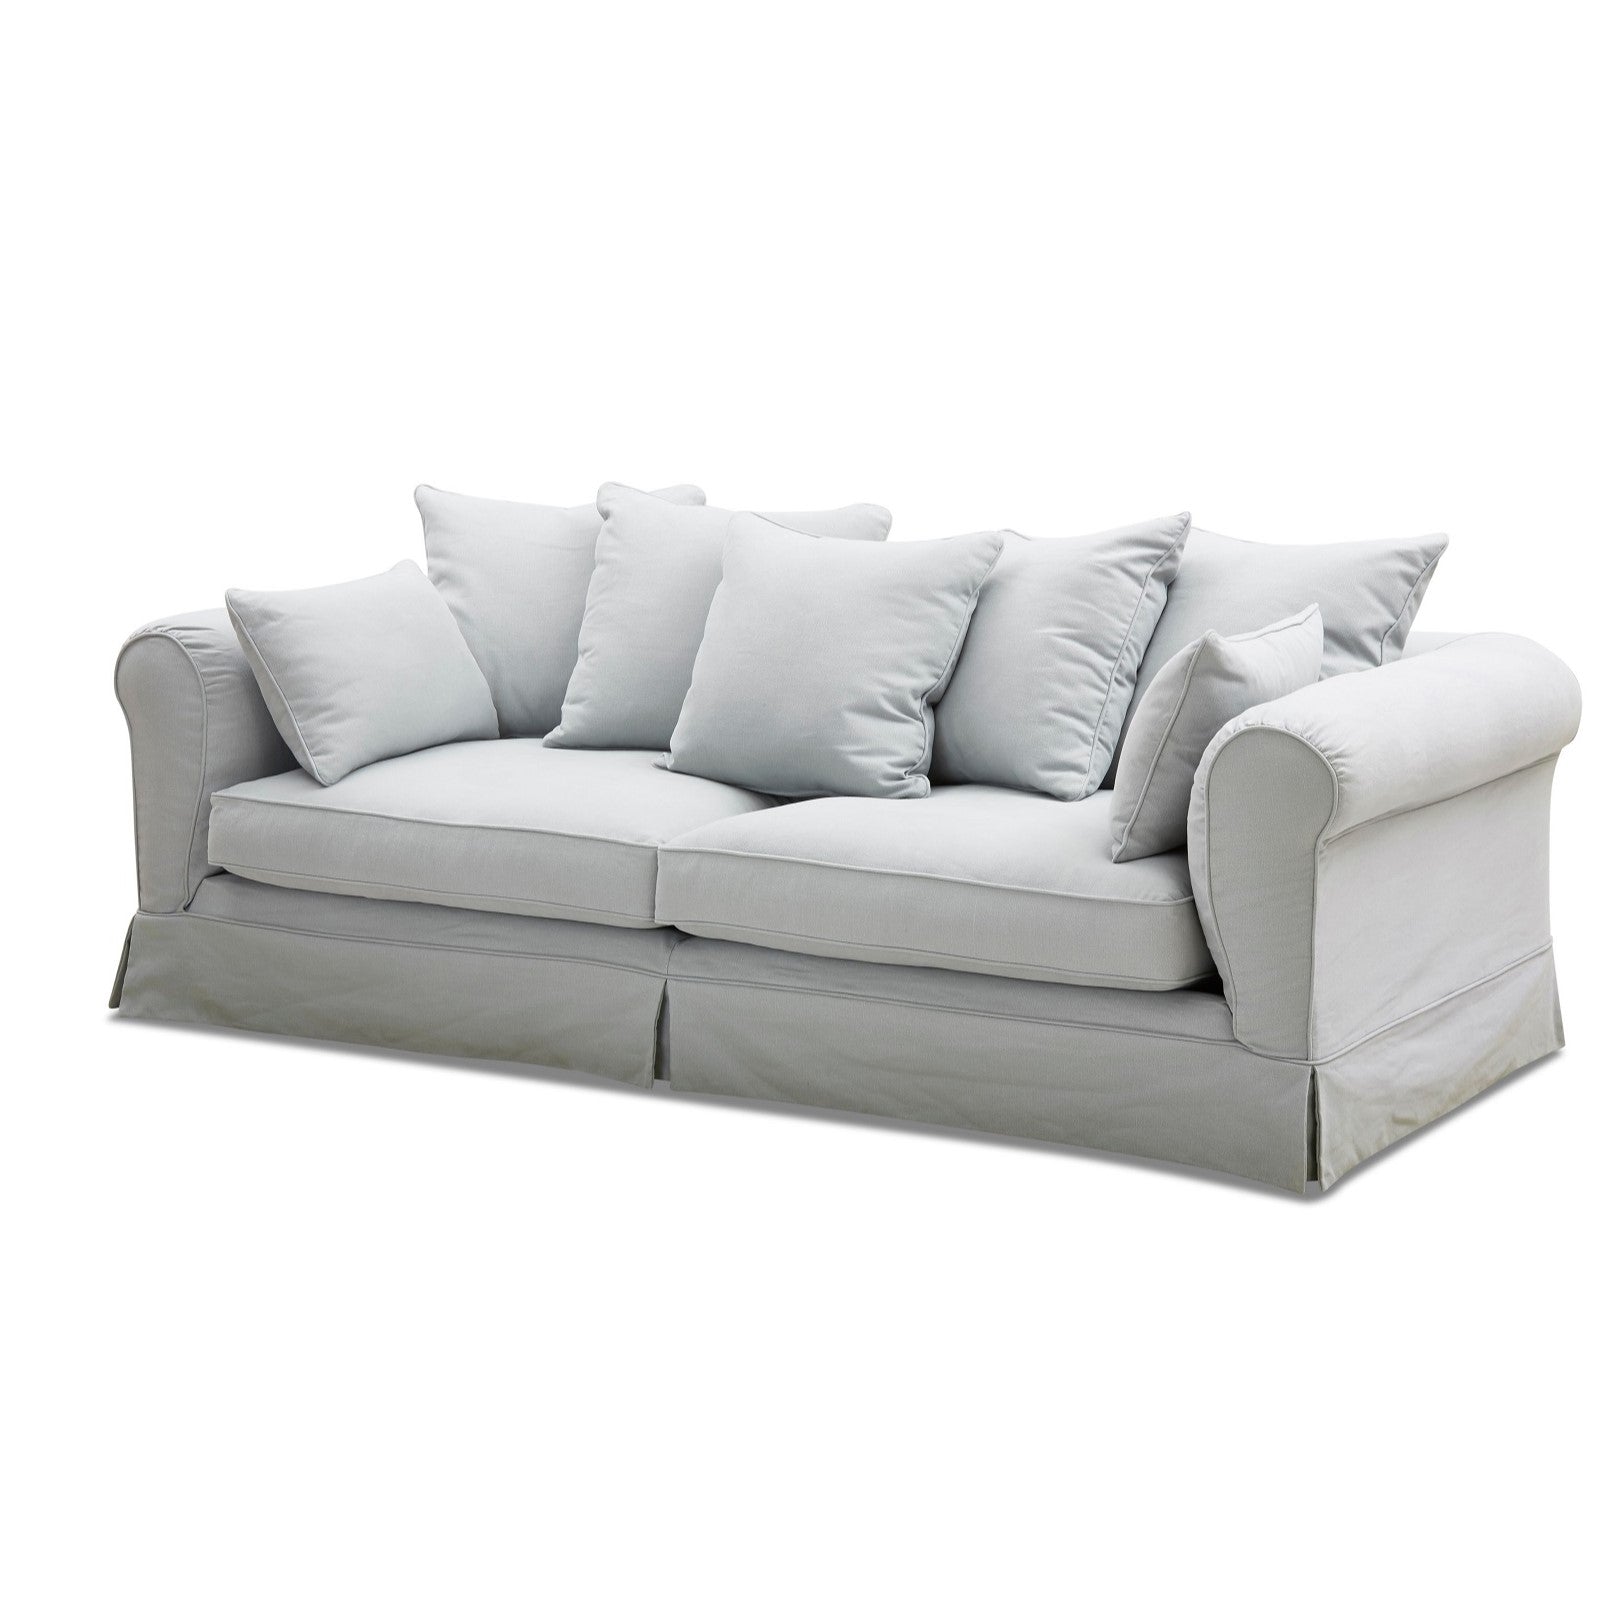 Loft Loose Cover Sofa by Molmic available from Make Your House A Home, Furniture Store located in Bendigo, Victoria. Australian Made in Melbourne.